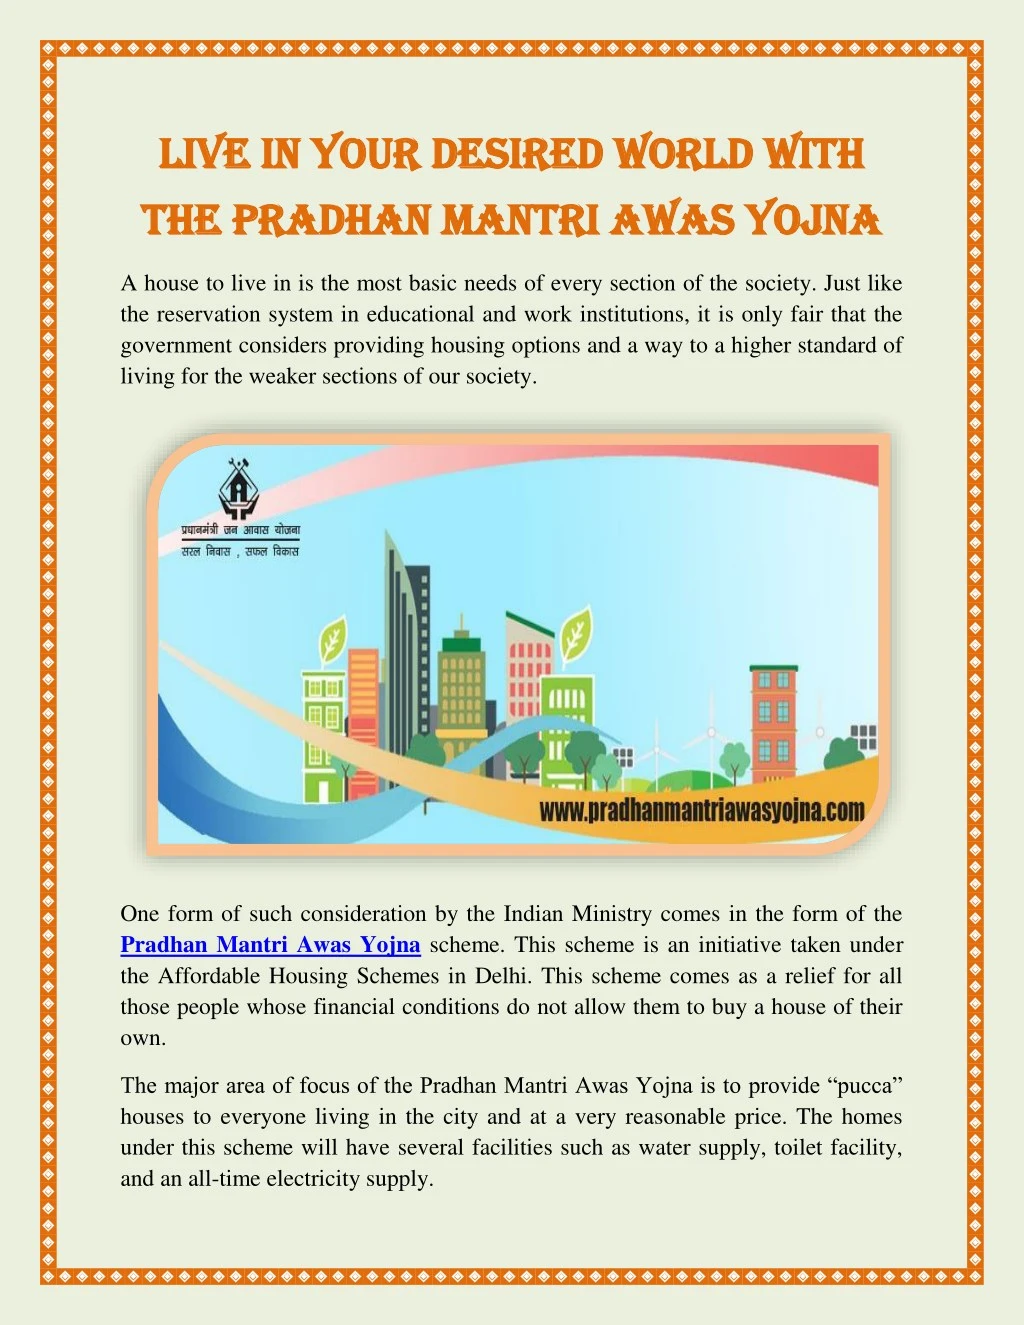 LIVE IN YOUR DESIRED WORLD WITH THE PRADHAN MANTRI AWAS YOJNA